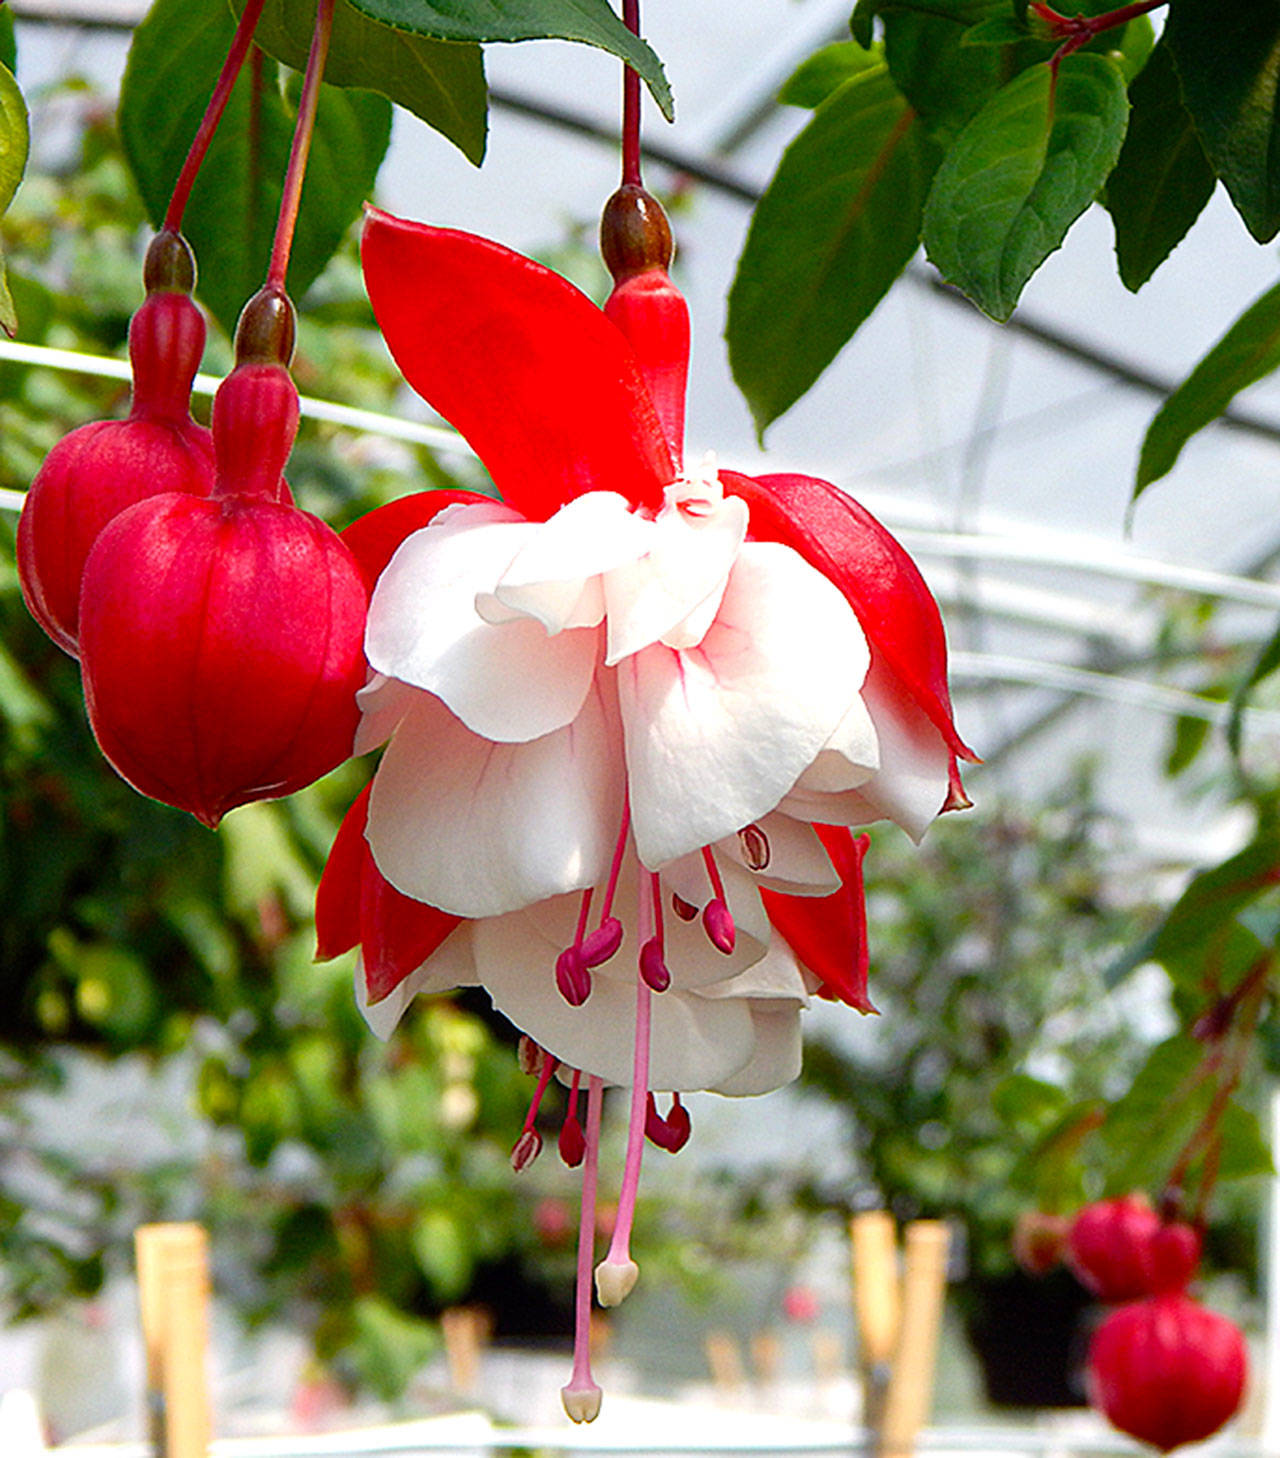 SwingTime is a delightful fuchsia and one of the most popular at Jordan Nursery near Stanwood. (Jon Bauer / The Herald)